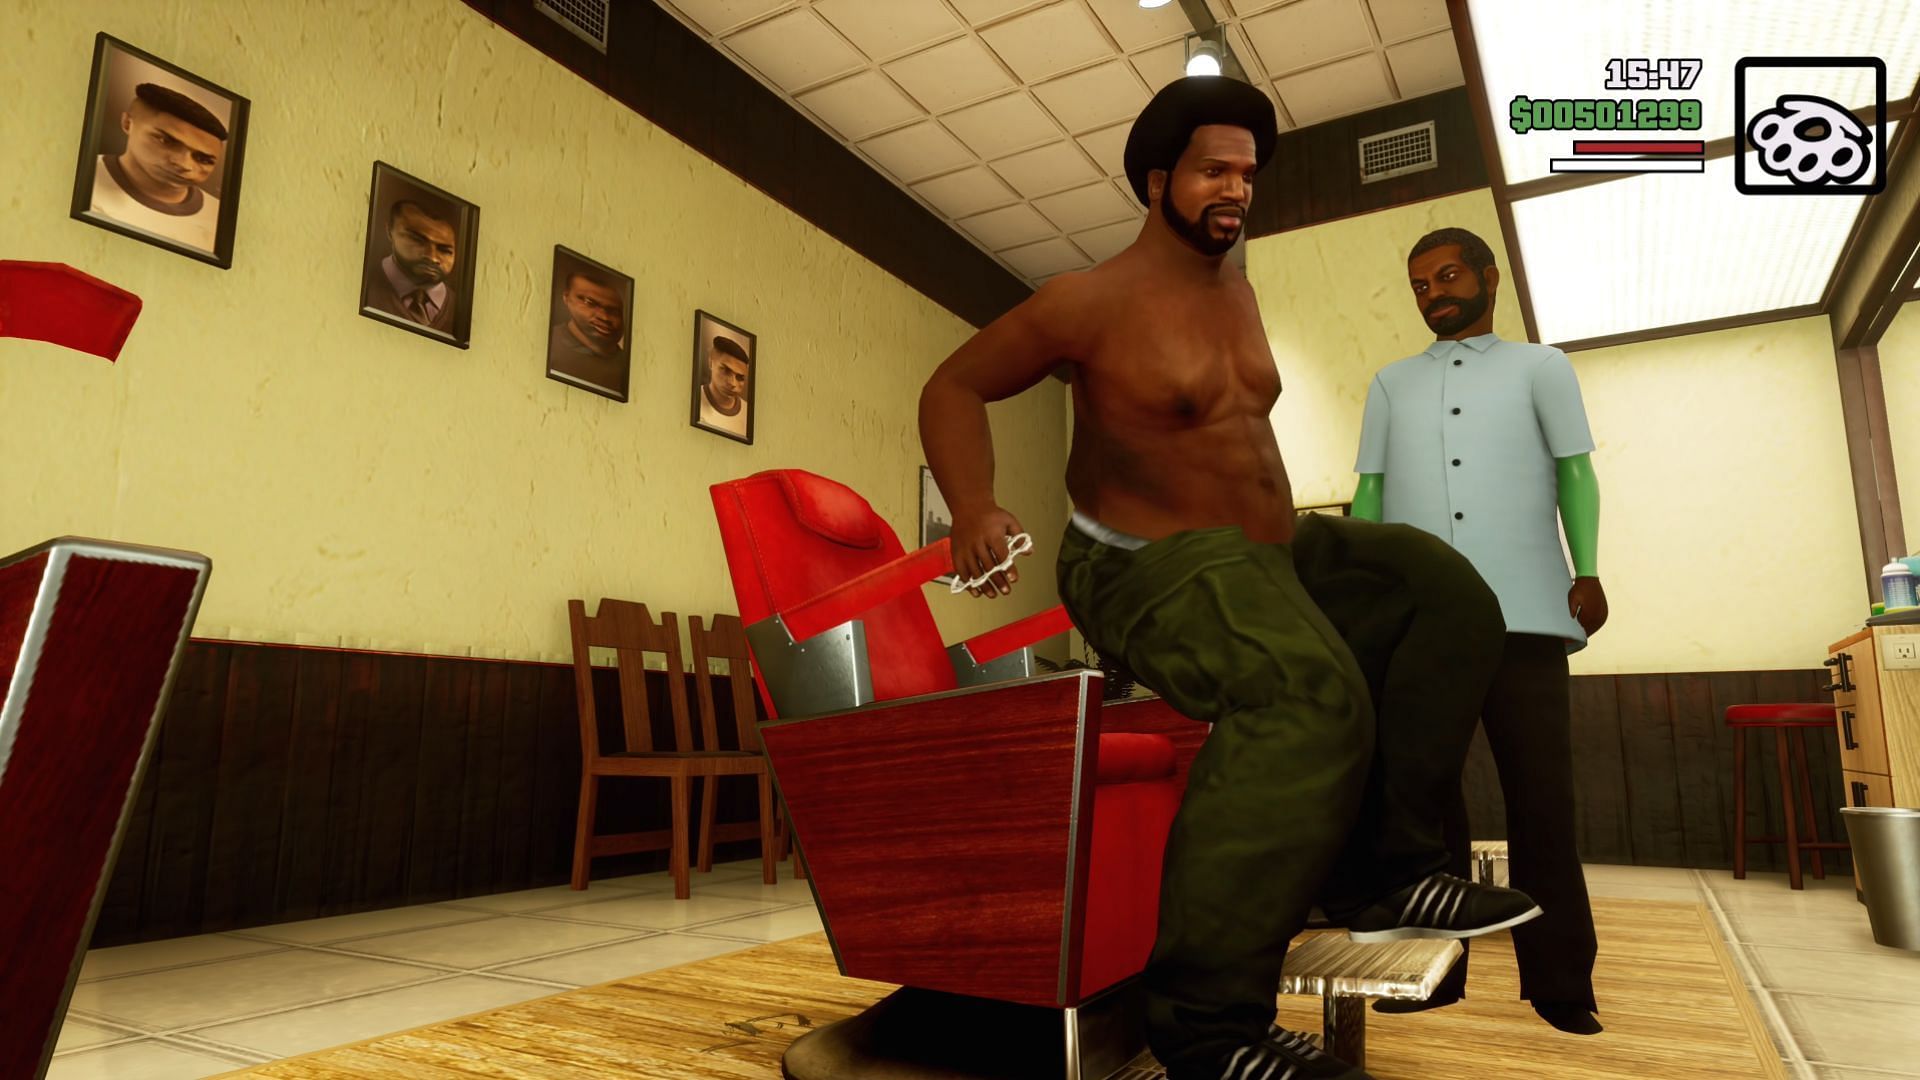 Looking back on why the multiplayer feature in GTA San Andreas was fondly  remembered